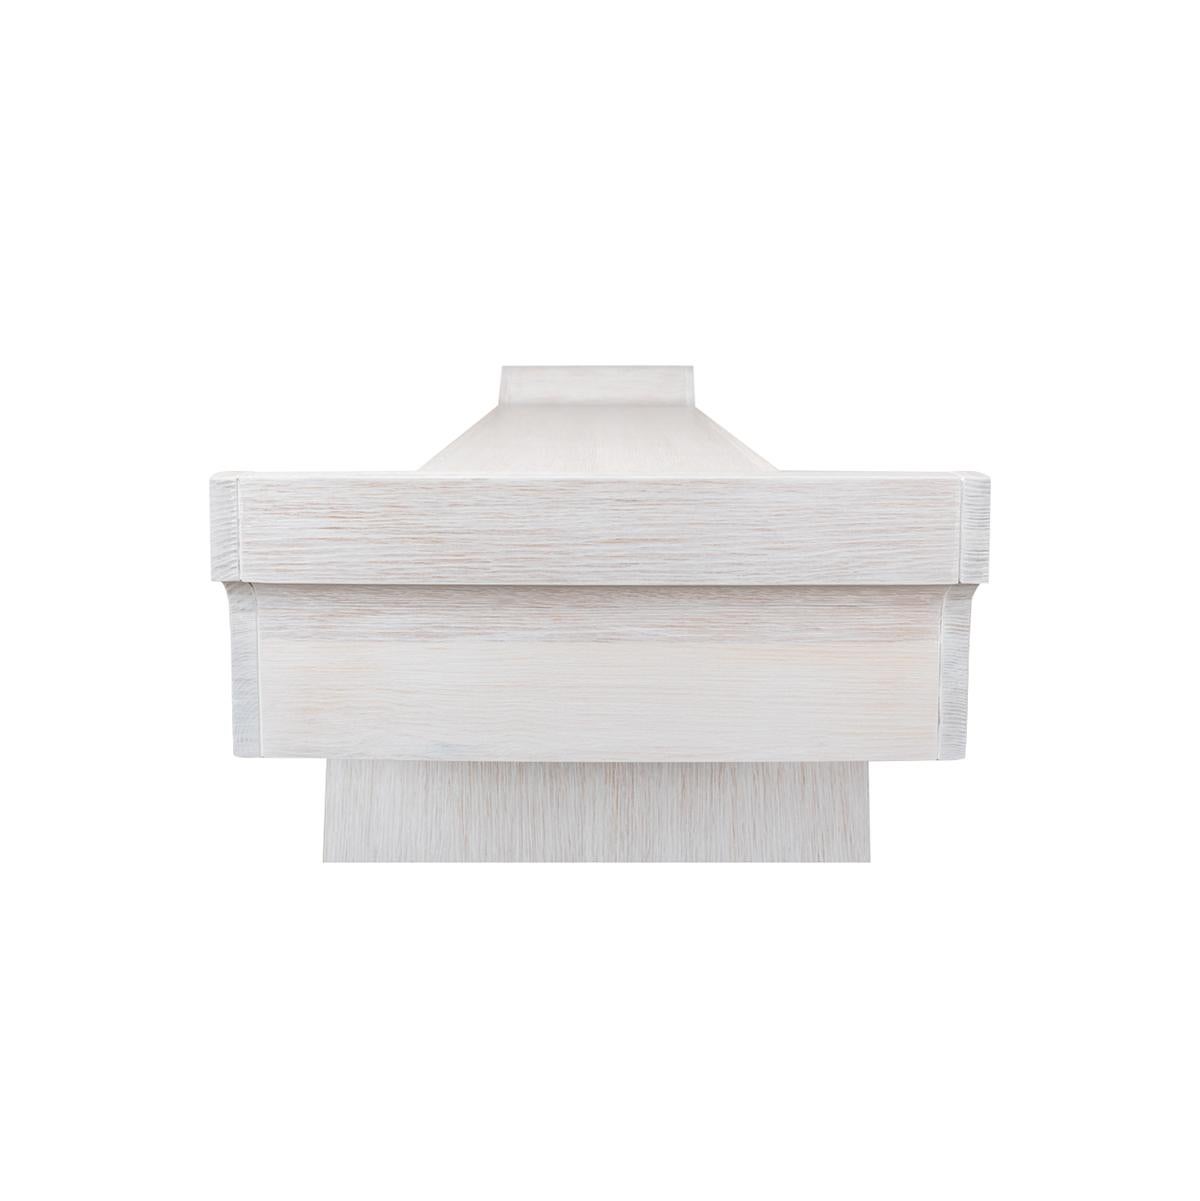 Asian Eastern Console Table - Whitewash White For Sale